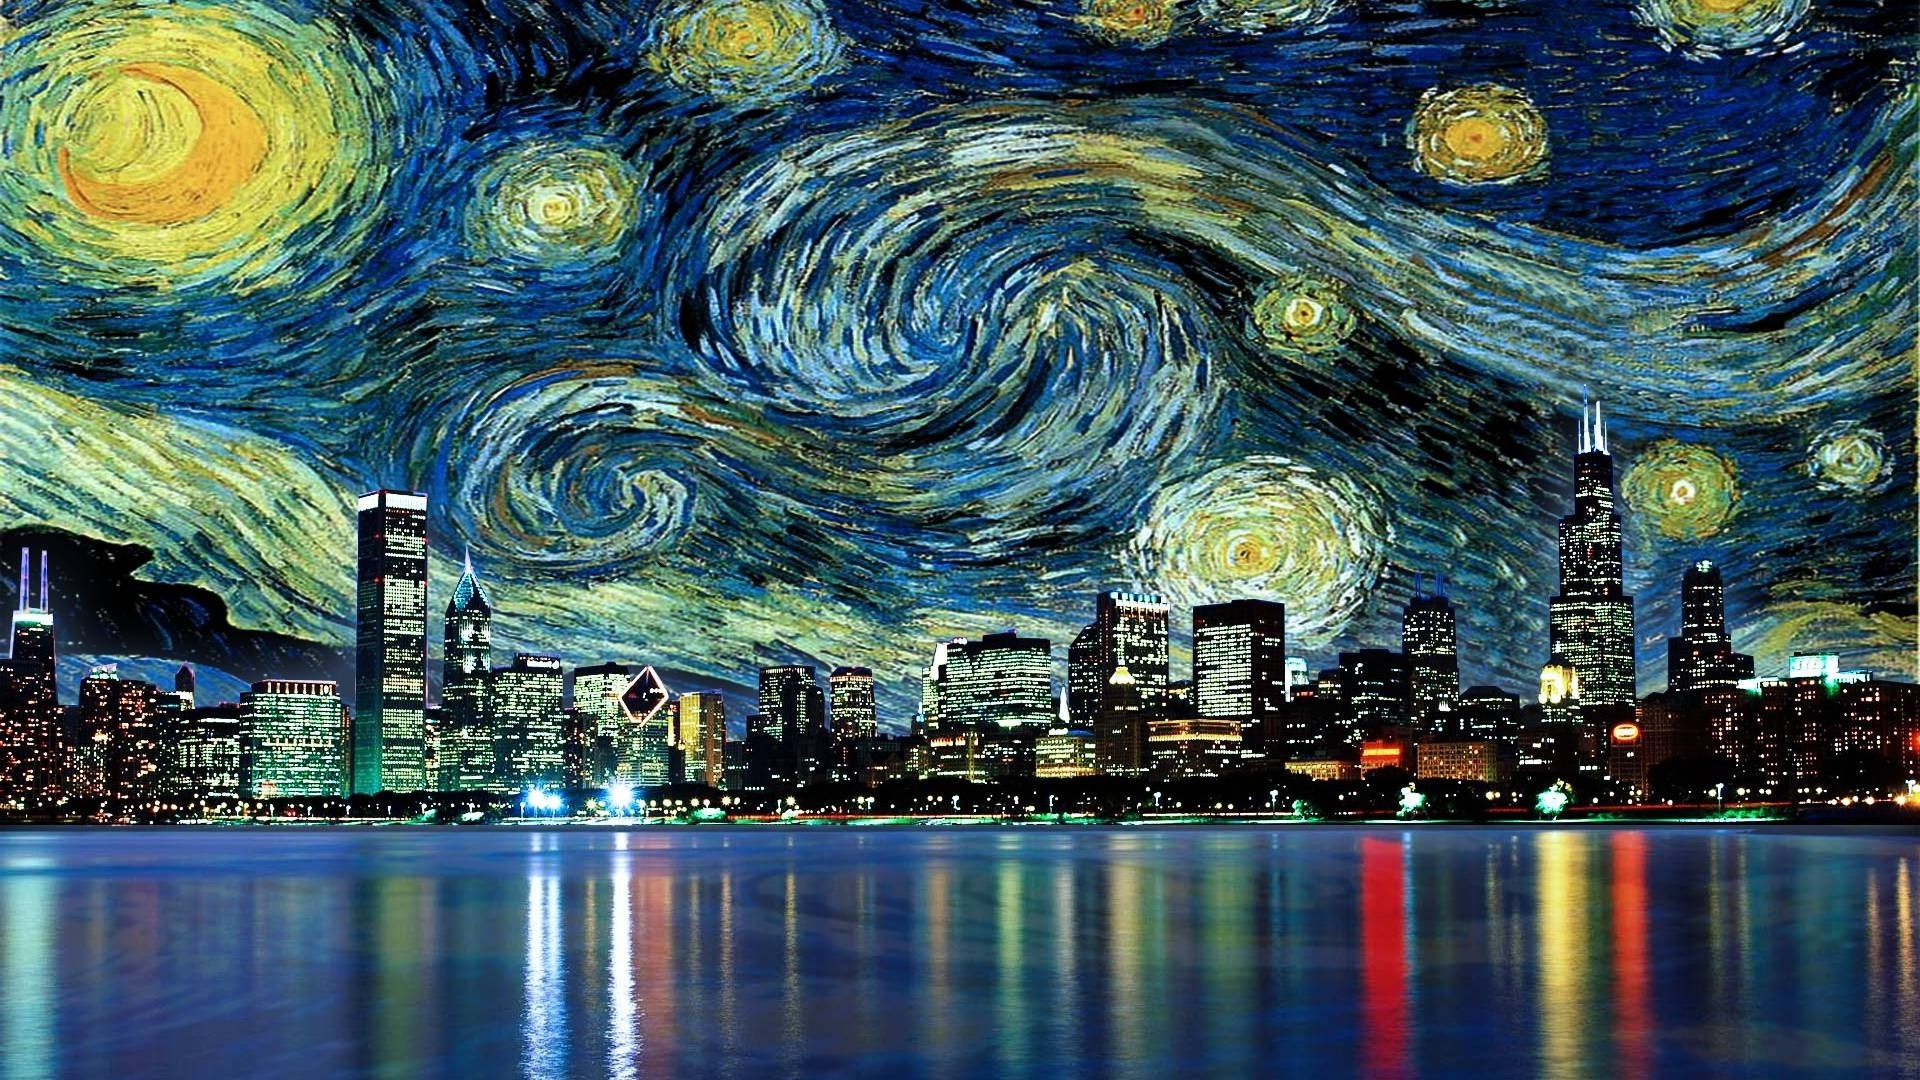 Cityscape, Skyscraper, Reflection, Painting, Vincent Van Gogh, Movies